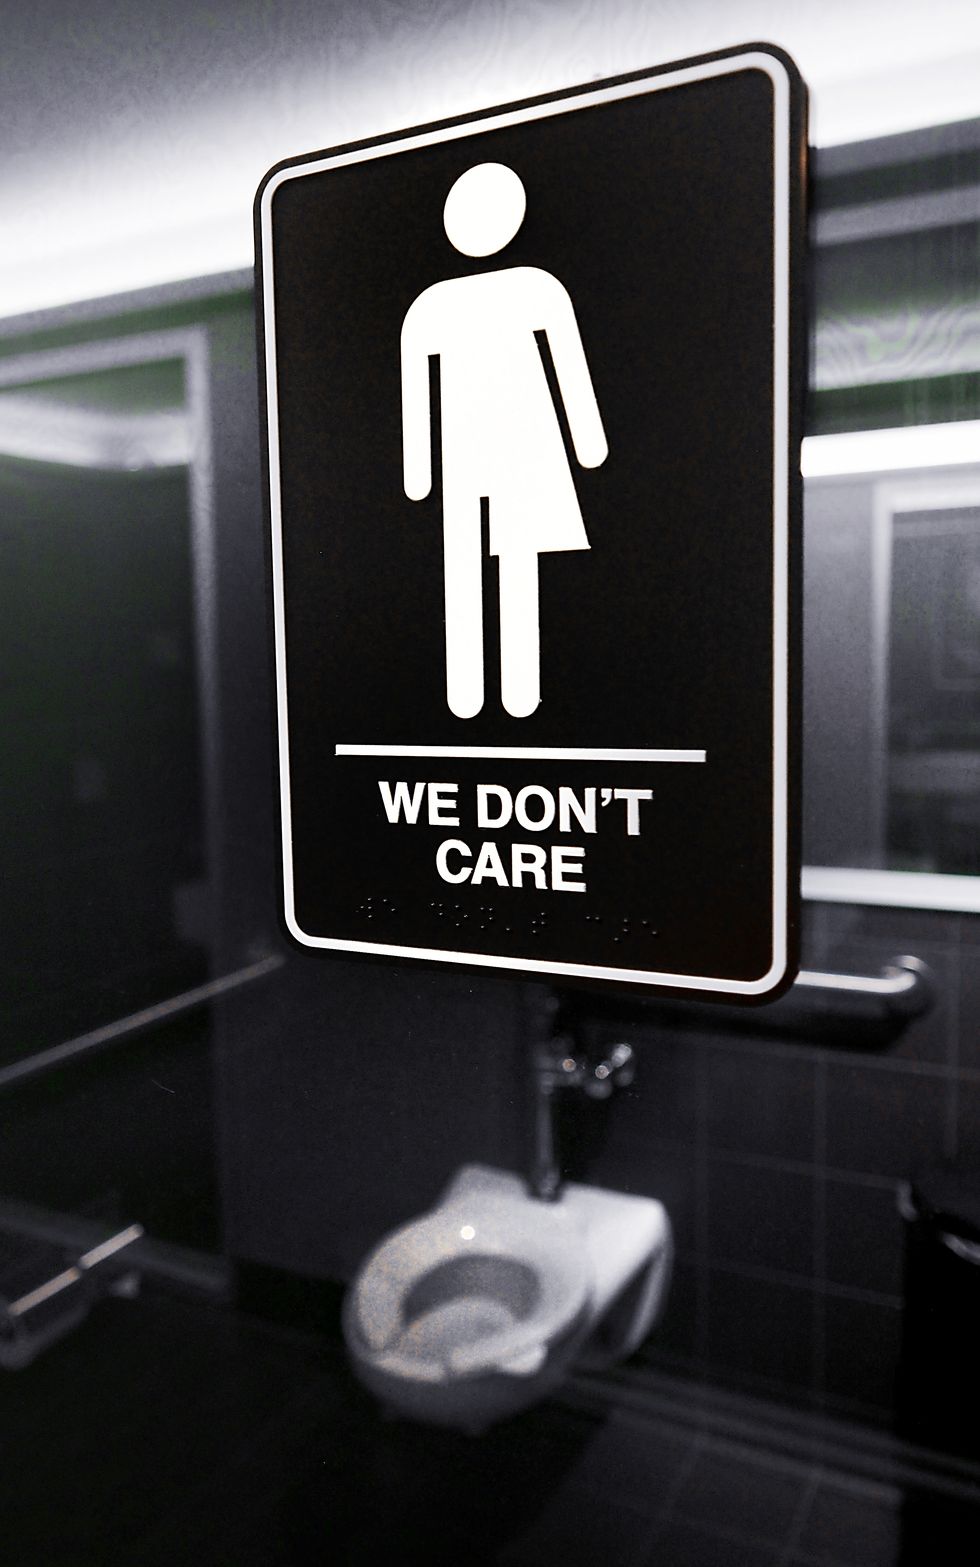 North Carolina Clashes With U.S. Over New Public Restroom Law | ELLE UK